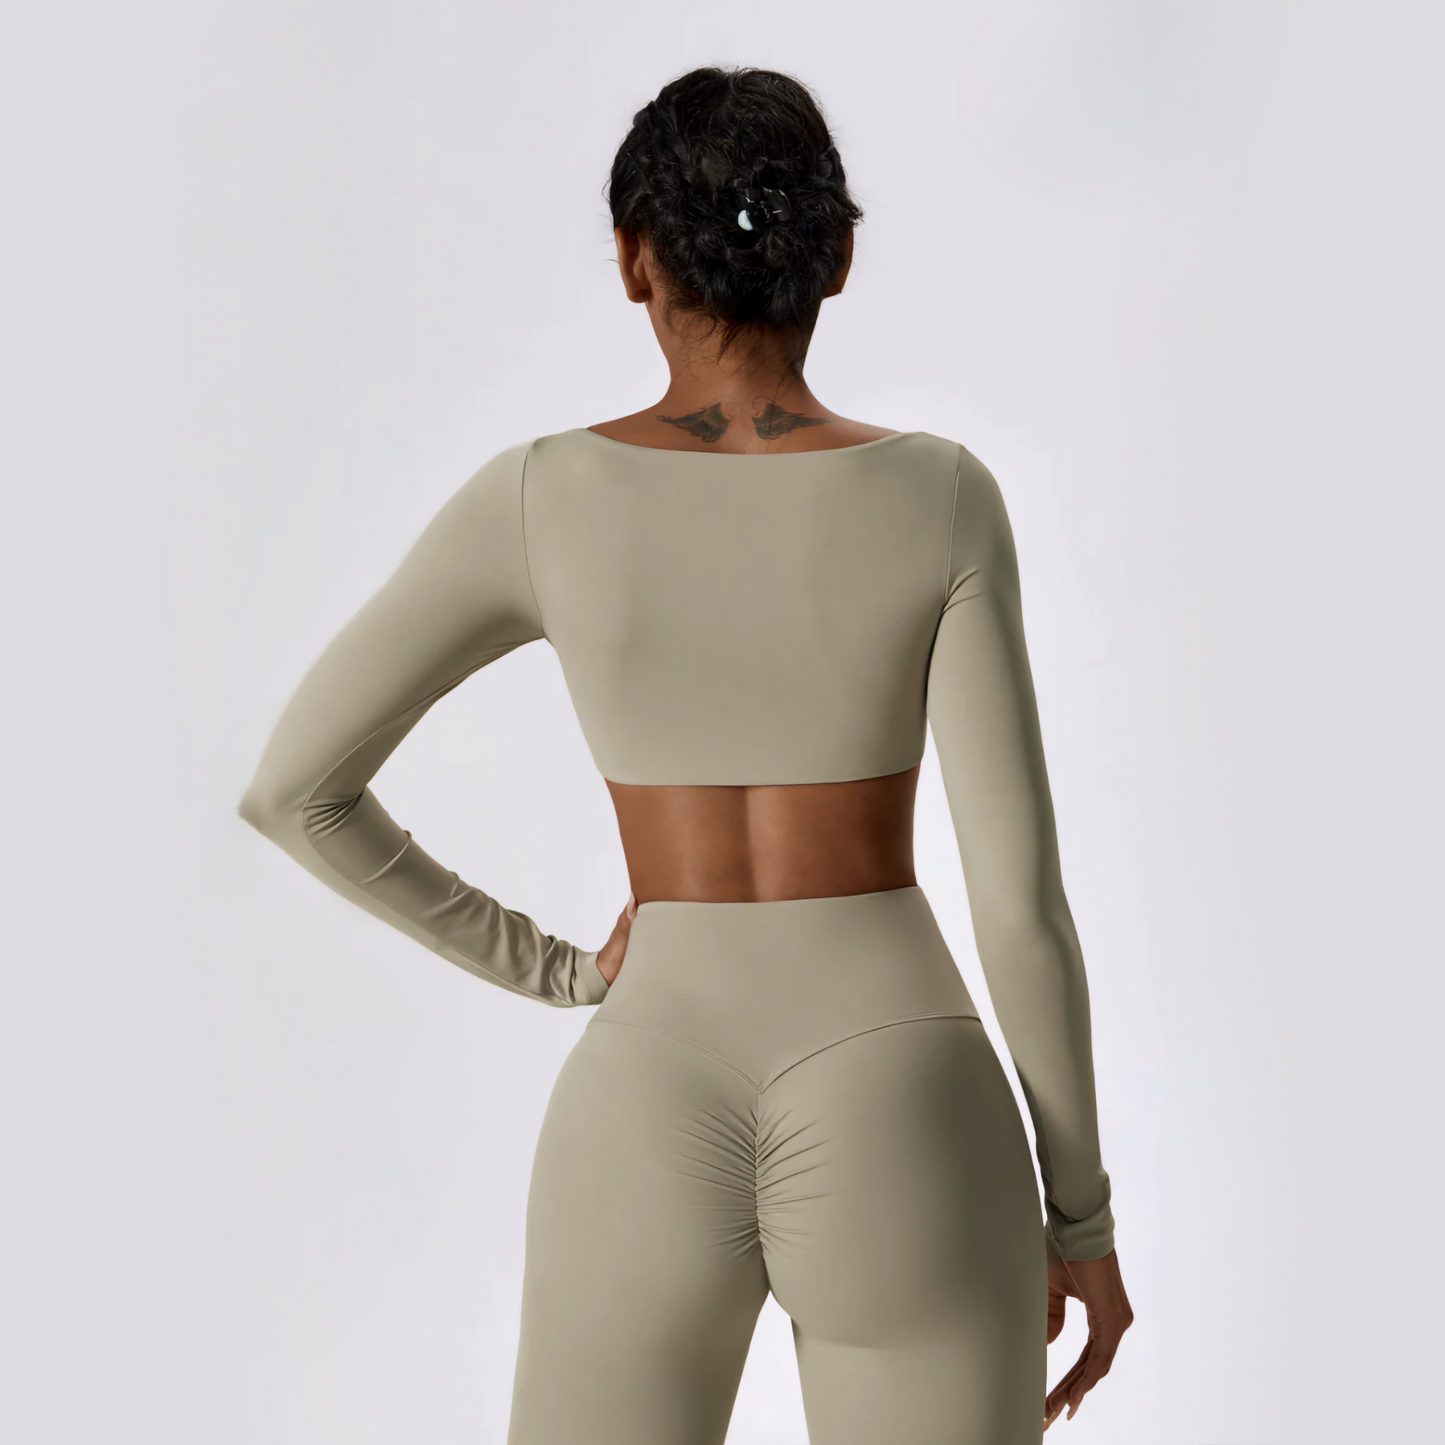 Back photo of fitness model wearing the body sculpting and squat proof Anastasia matching workout set in the colour oatmeal from Vibras Activewear.